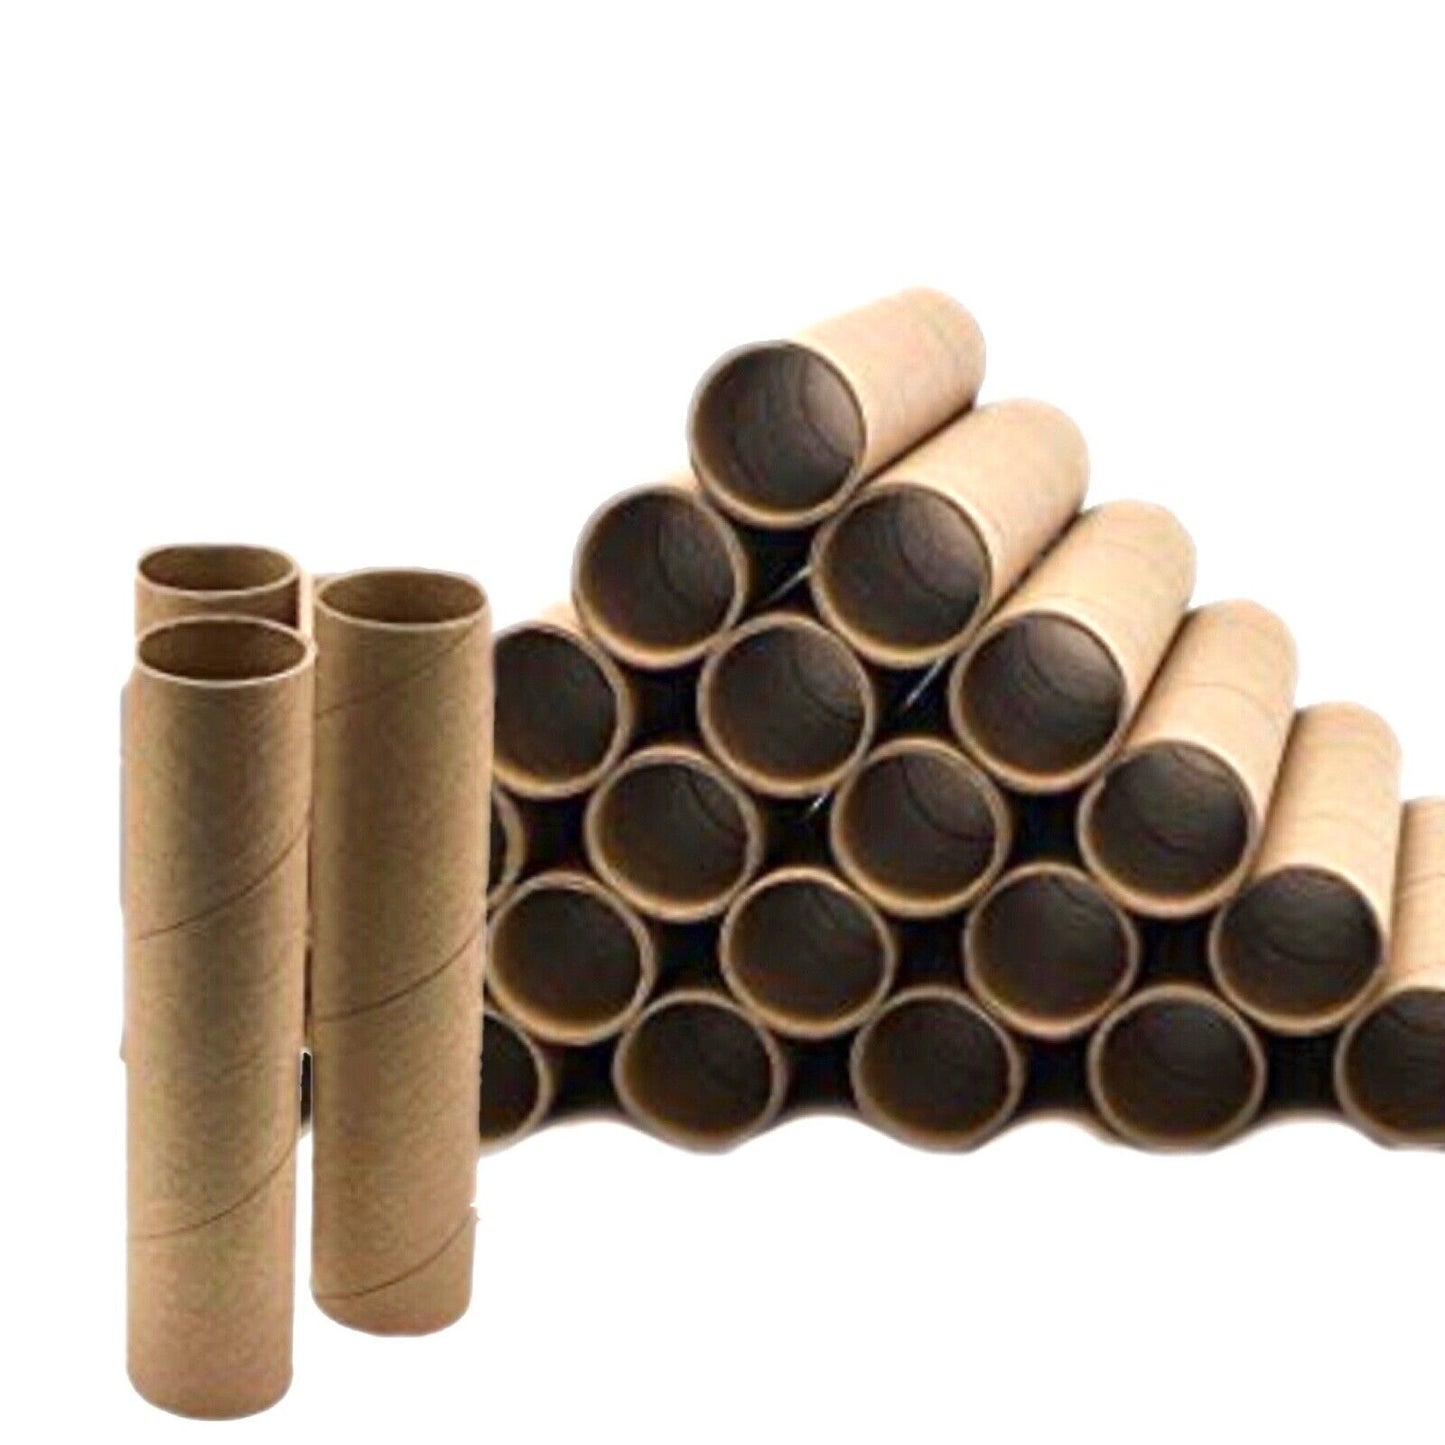 12x Paper Cardboard Tube for Crafting 150mm x 4mm